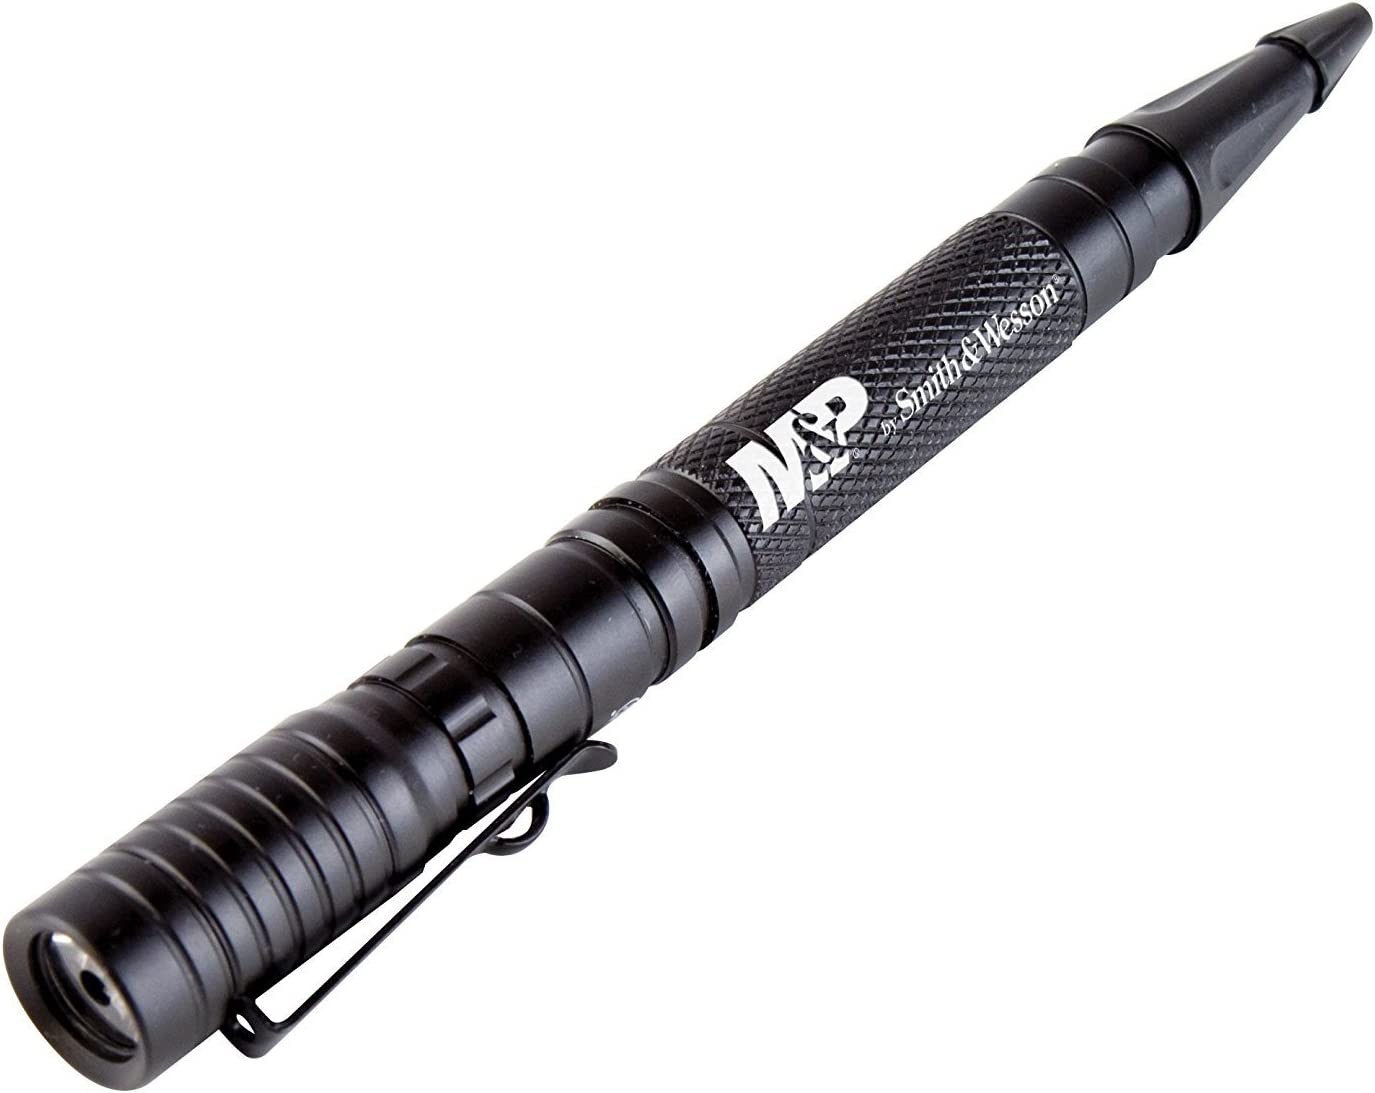 Smith & Wesson M&P Delta Force PL-10 Aircraft Aluminum Tactical Pen with 105 Lumens Flashlight for Survival, Hunting, Outdoor and EDC